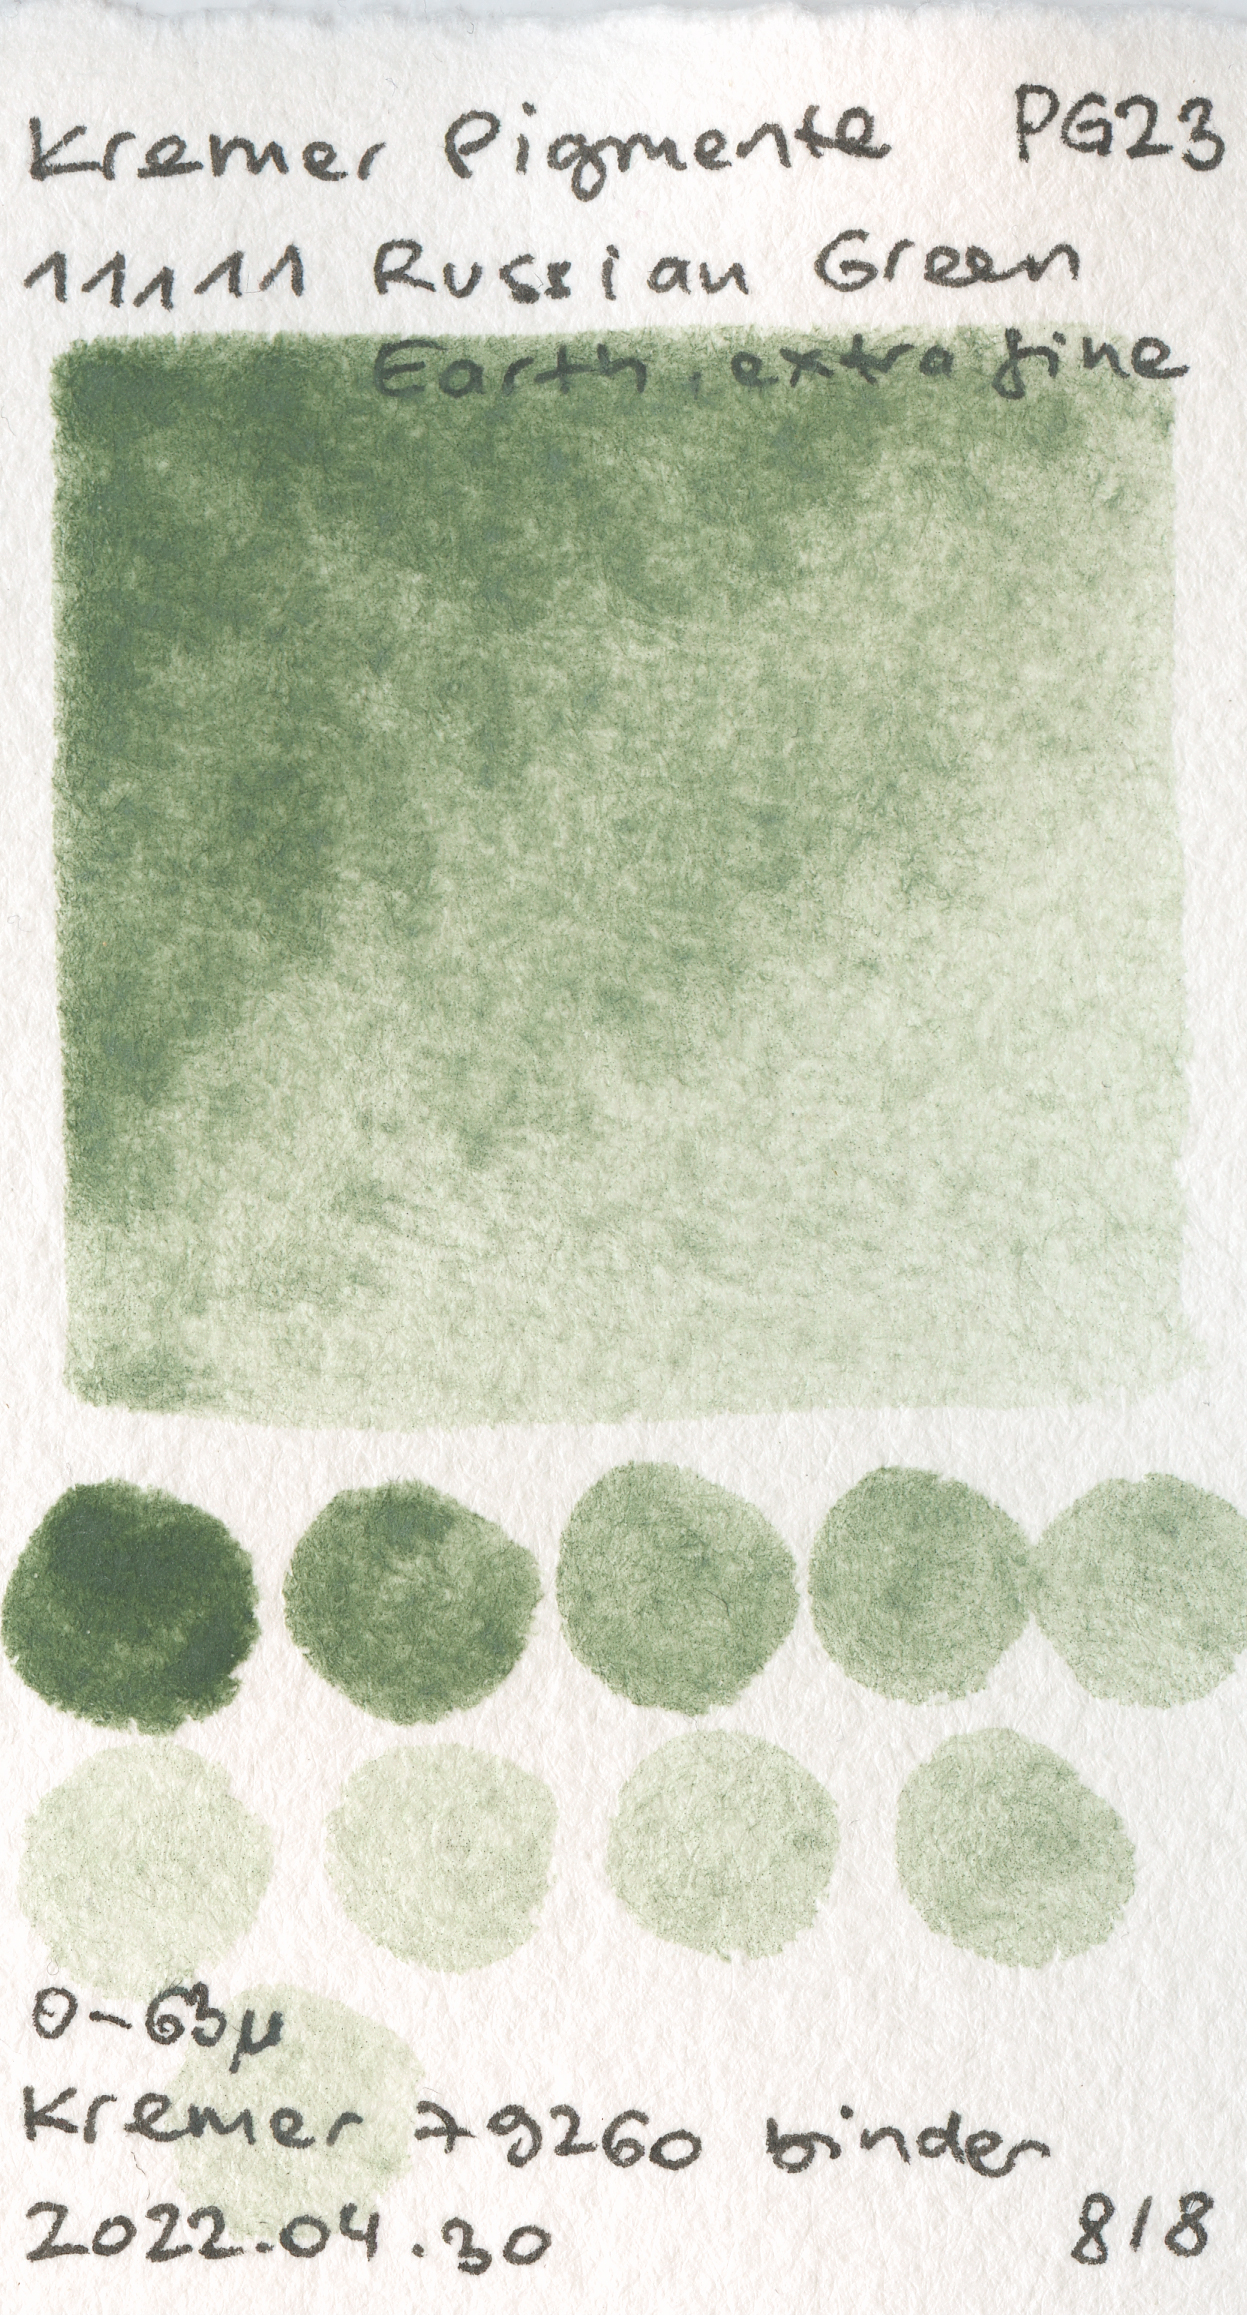 Kremer Pigmente [Dry] Pigments 11111 Russian Green Earth, extra fine PG23 watercolor swatch